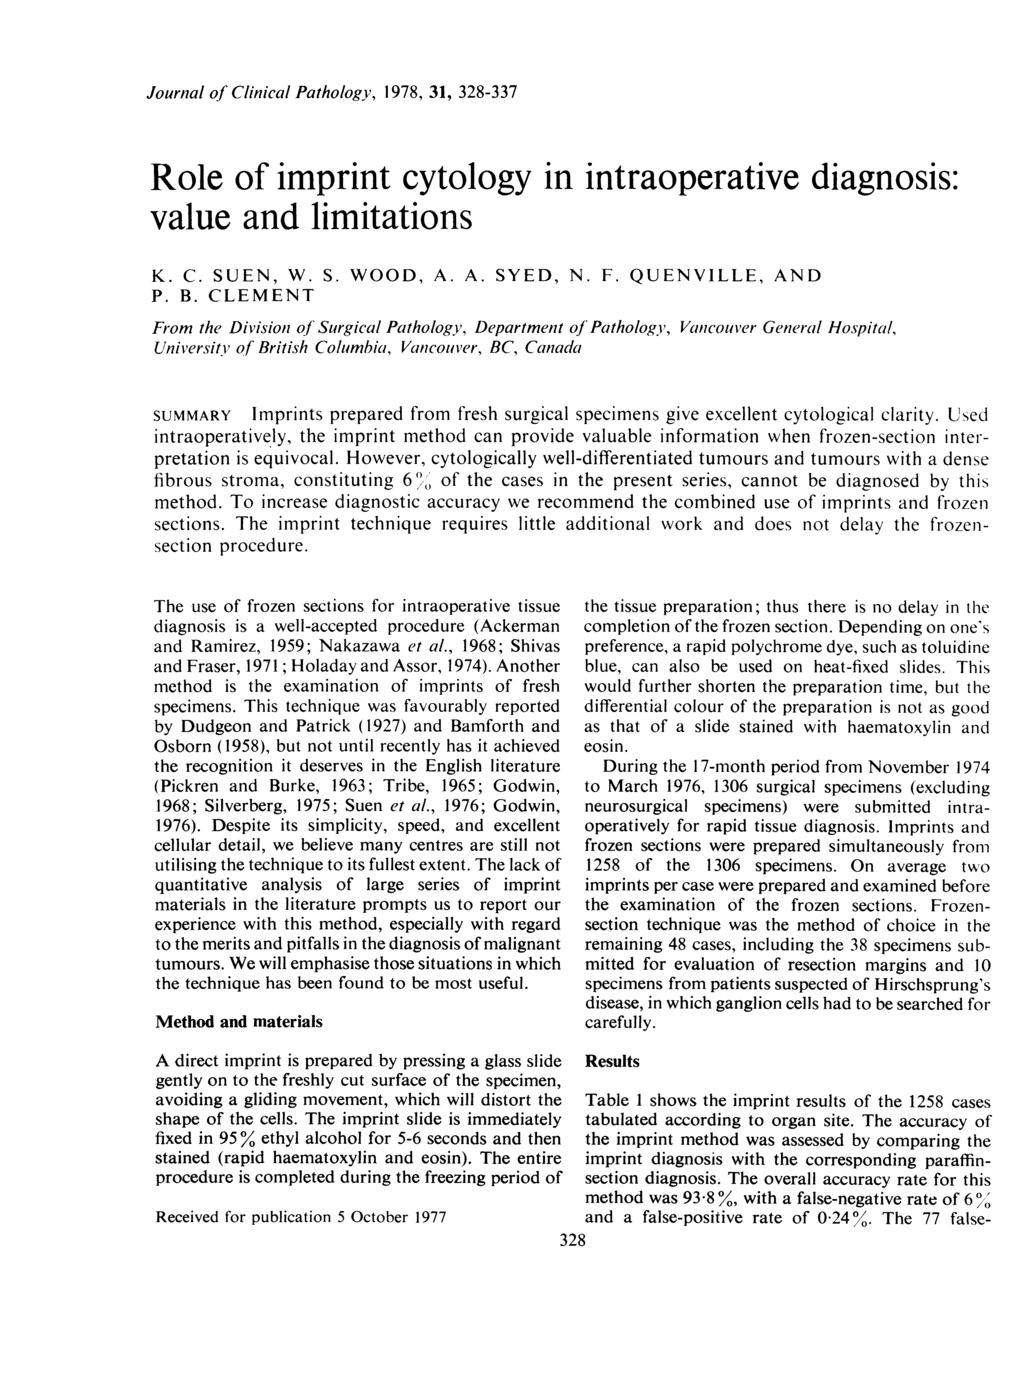 Journal of Clinical Pathology, 1978, 31, 328-337 Role of imprint cytology in intraoperative diagnosis: value and limitations K. C. SUEN, W. S. WOOD, A. A. SYED, N. F. QUENVILLE, AND P. B.